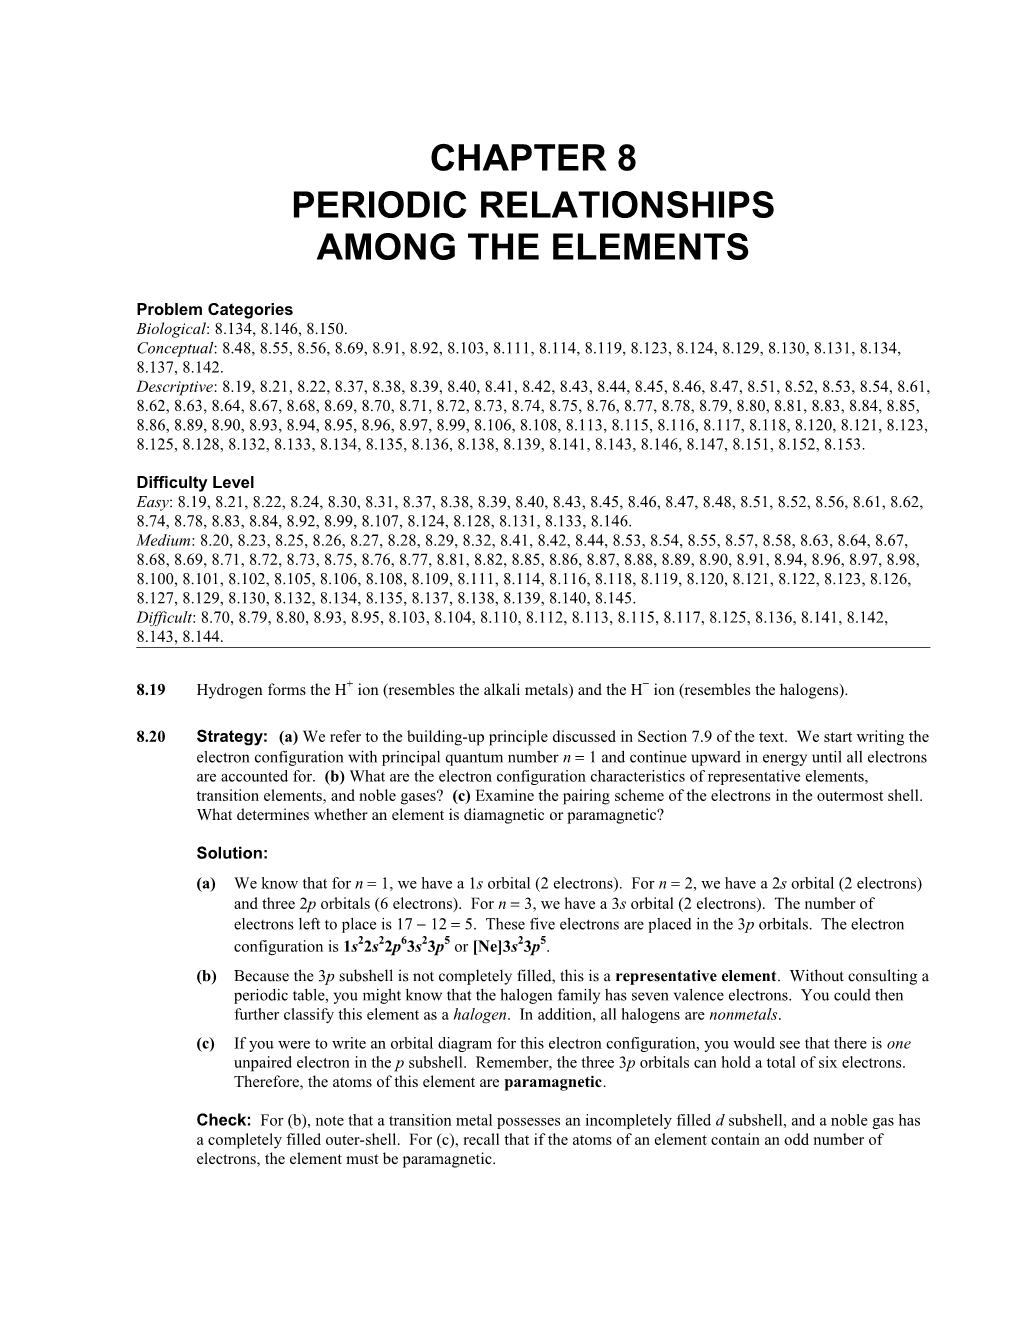 Chapter 8: Periodic Relationships Among the Elements